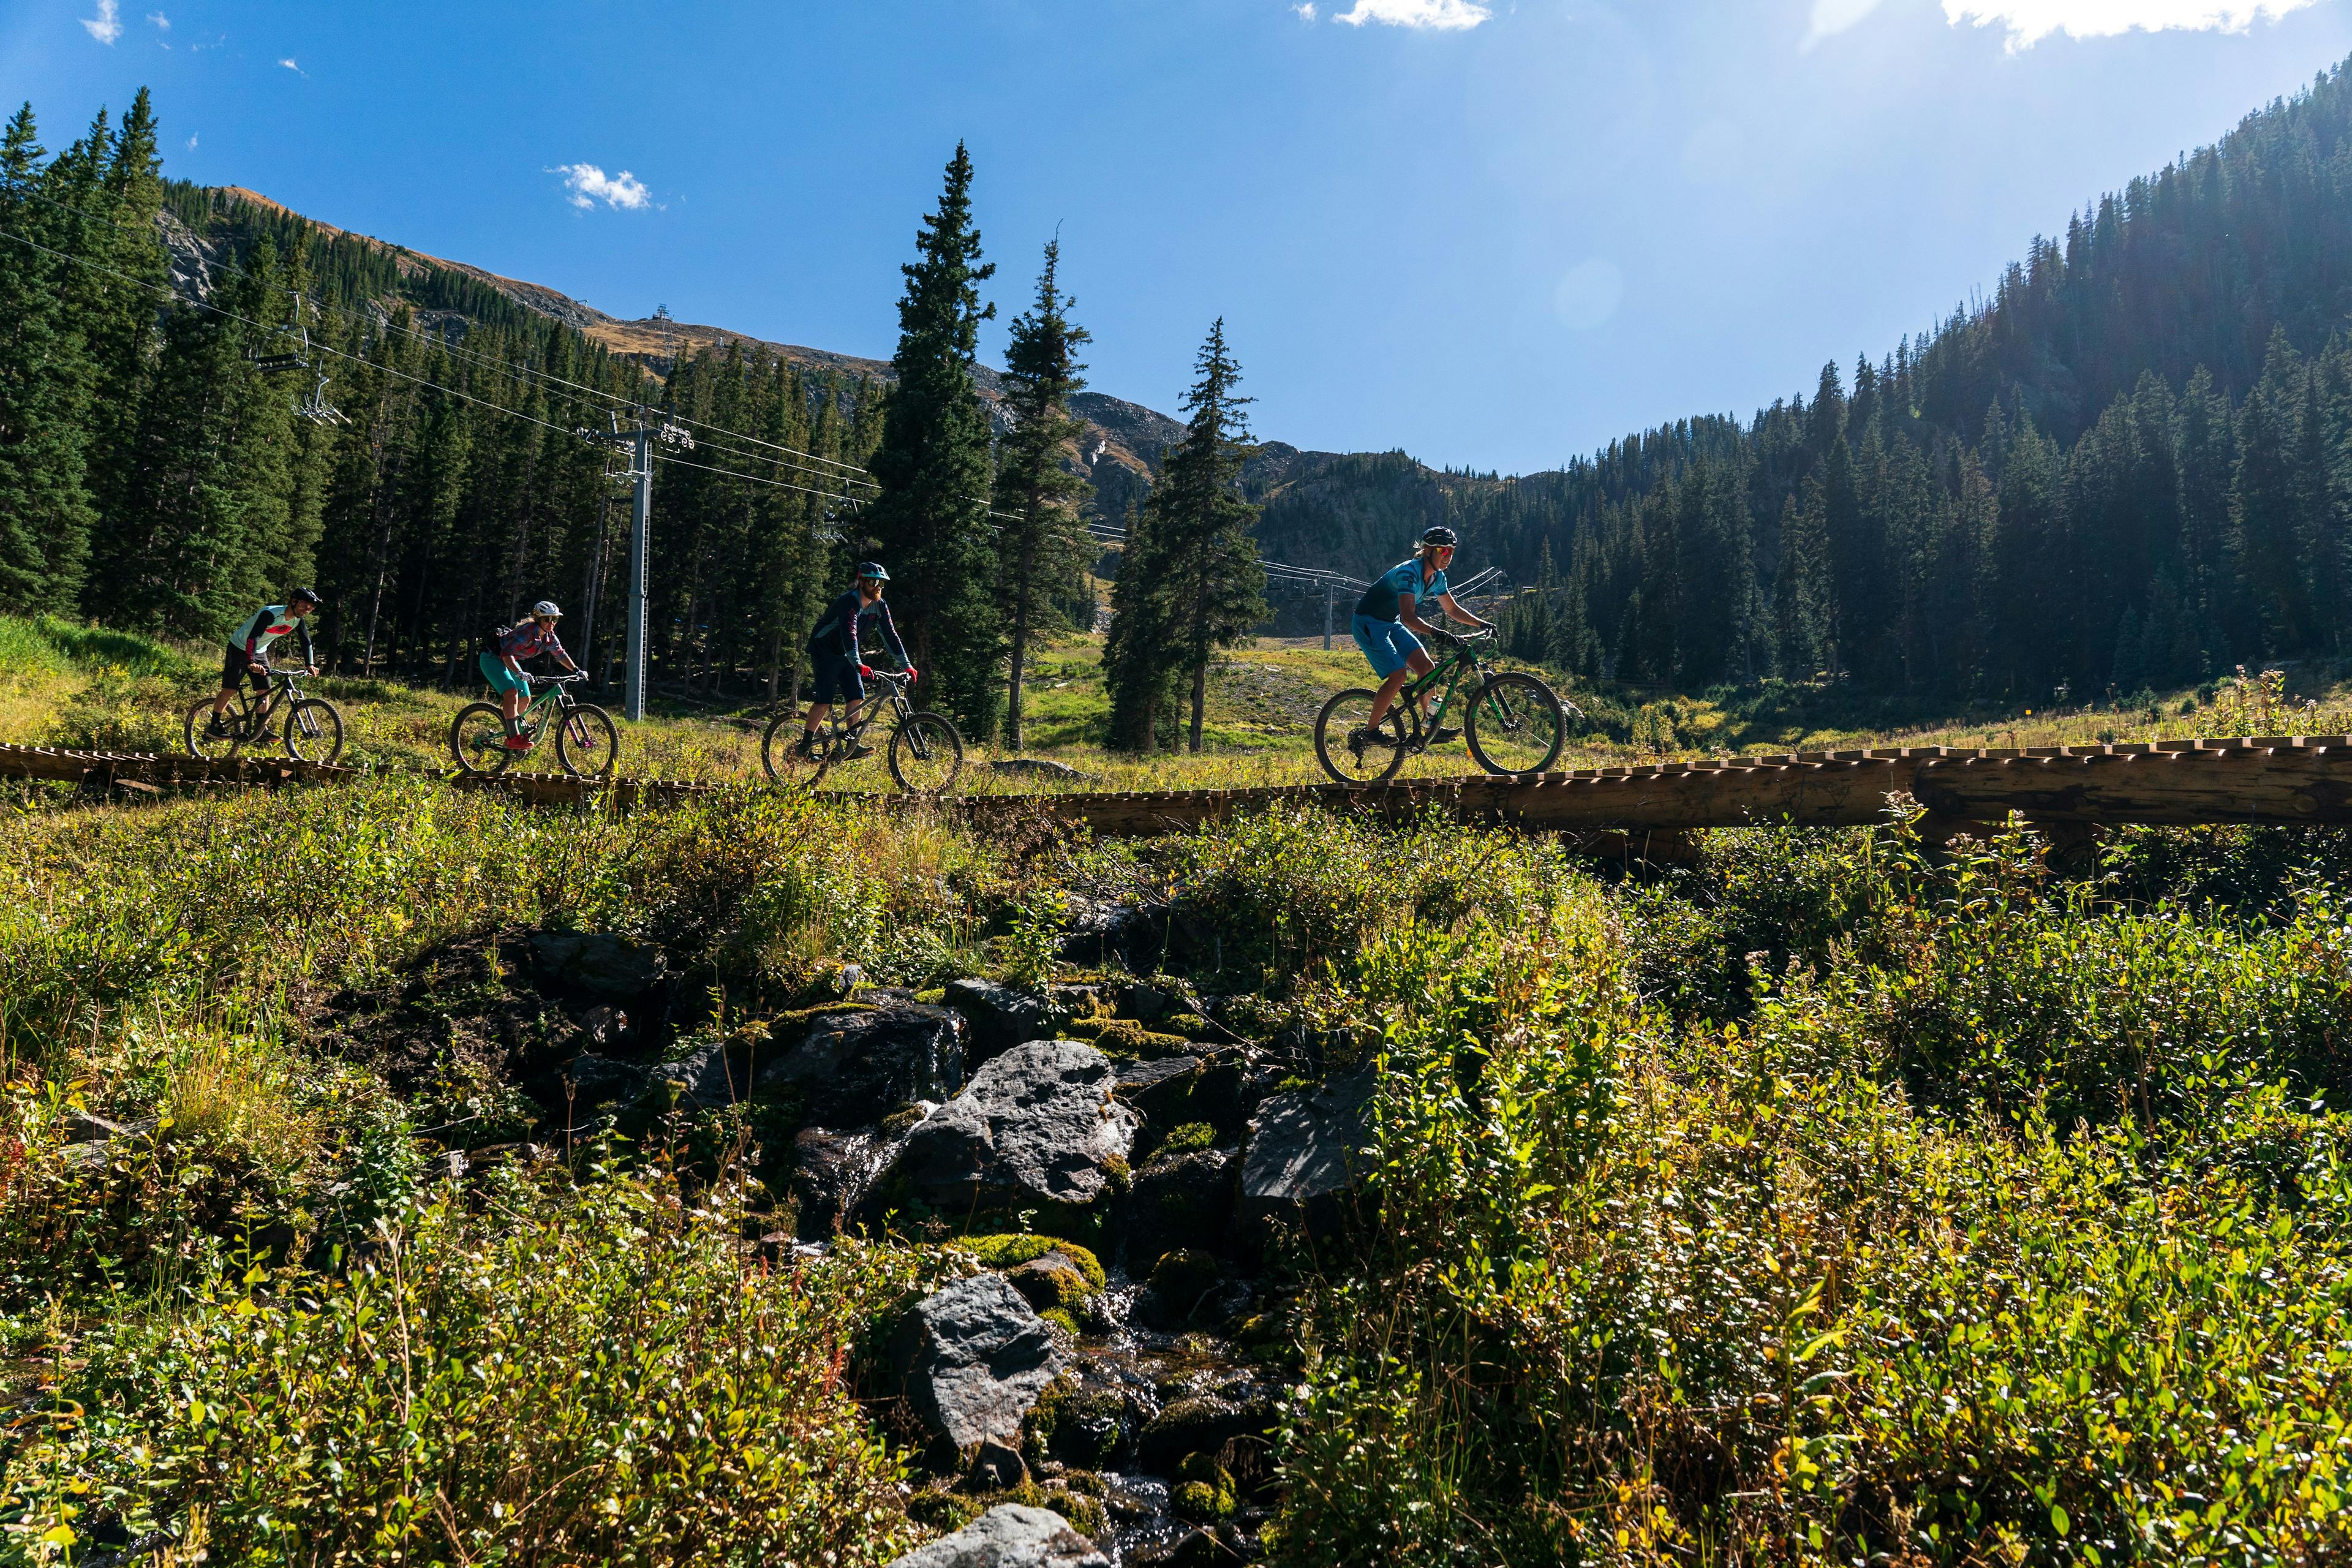 Four bikers on a bike park trail at Taos Ski Valley